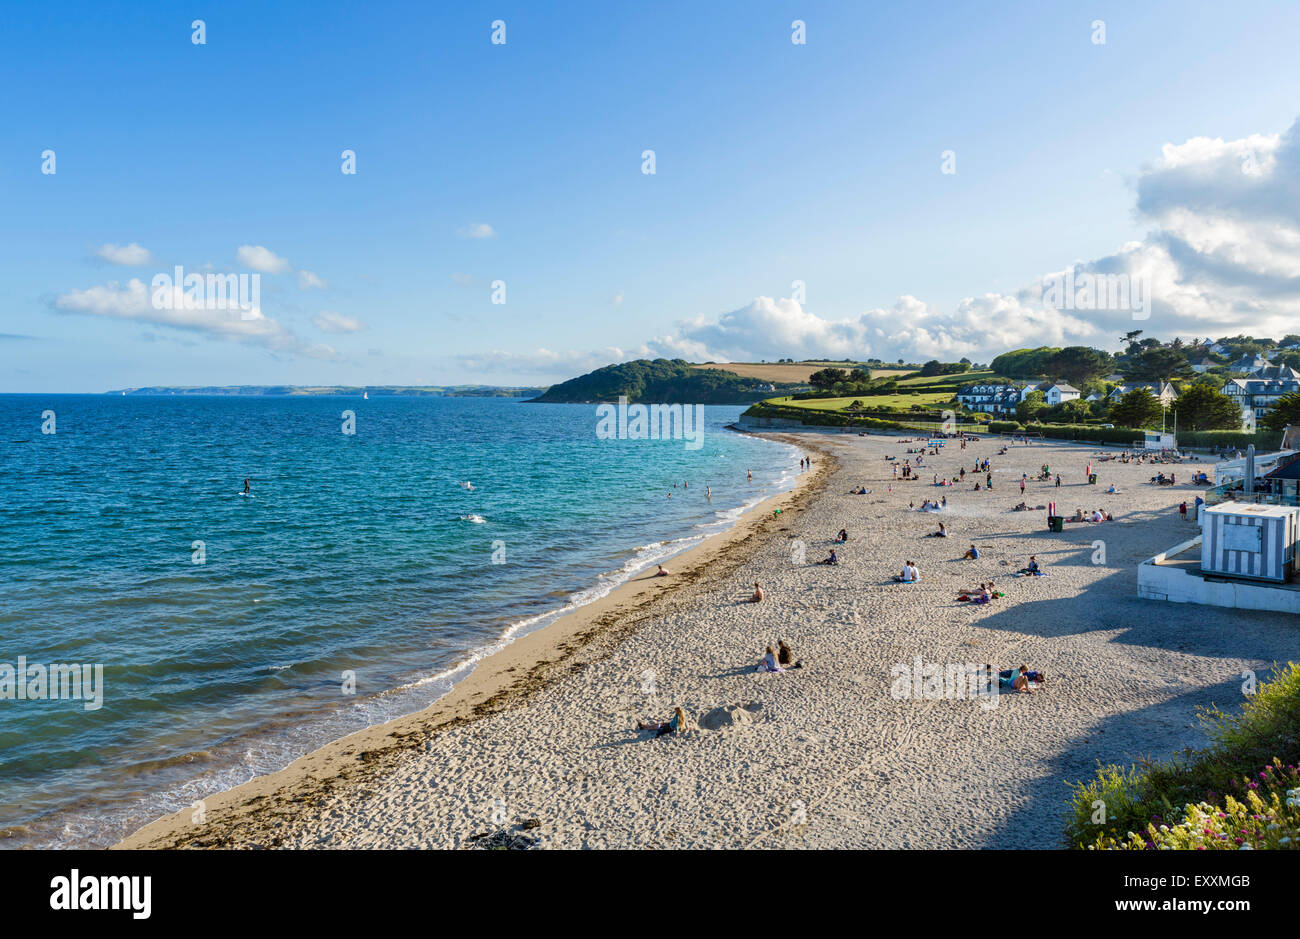 Plage de Gyllyngvase, Falmouth, Cornwall, England, UK Banque D'Images